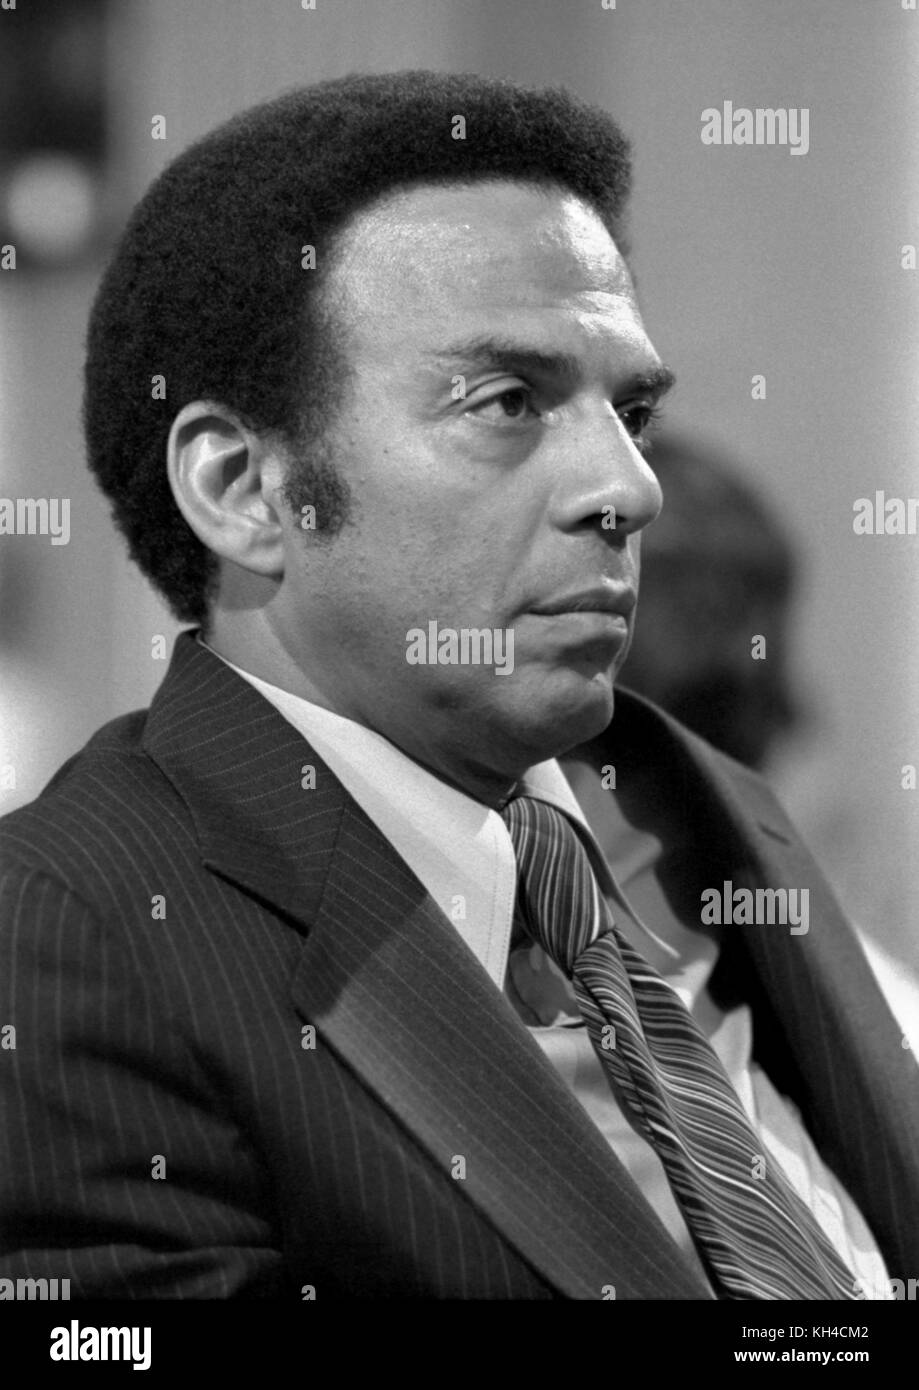 U.N. Ambassador Andrew Young with the Foreign Relations subcommittee on African Affairs on June 6, 1977. Ambassador Young was an early leader in the Civil Rights Movement and a close confidant of Martin Luther King. Young would later serve as the Mayor of Atlanta from 1982-1990.   (Photo by Thomas J. O’Halloran) Stock Photo